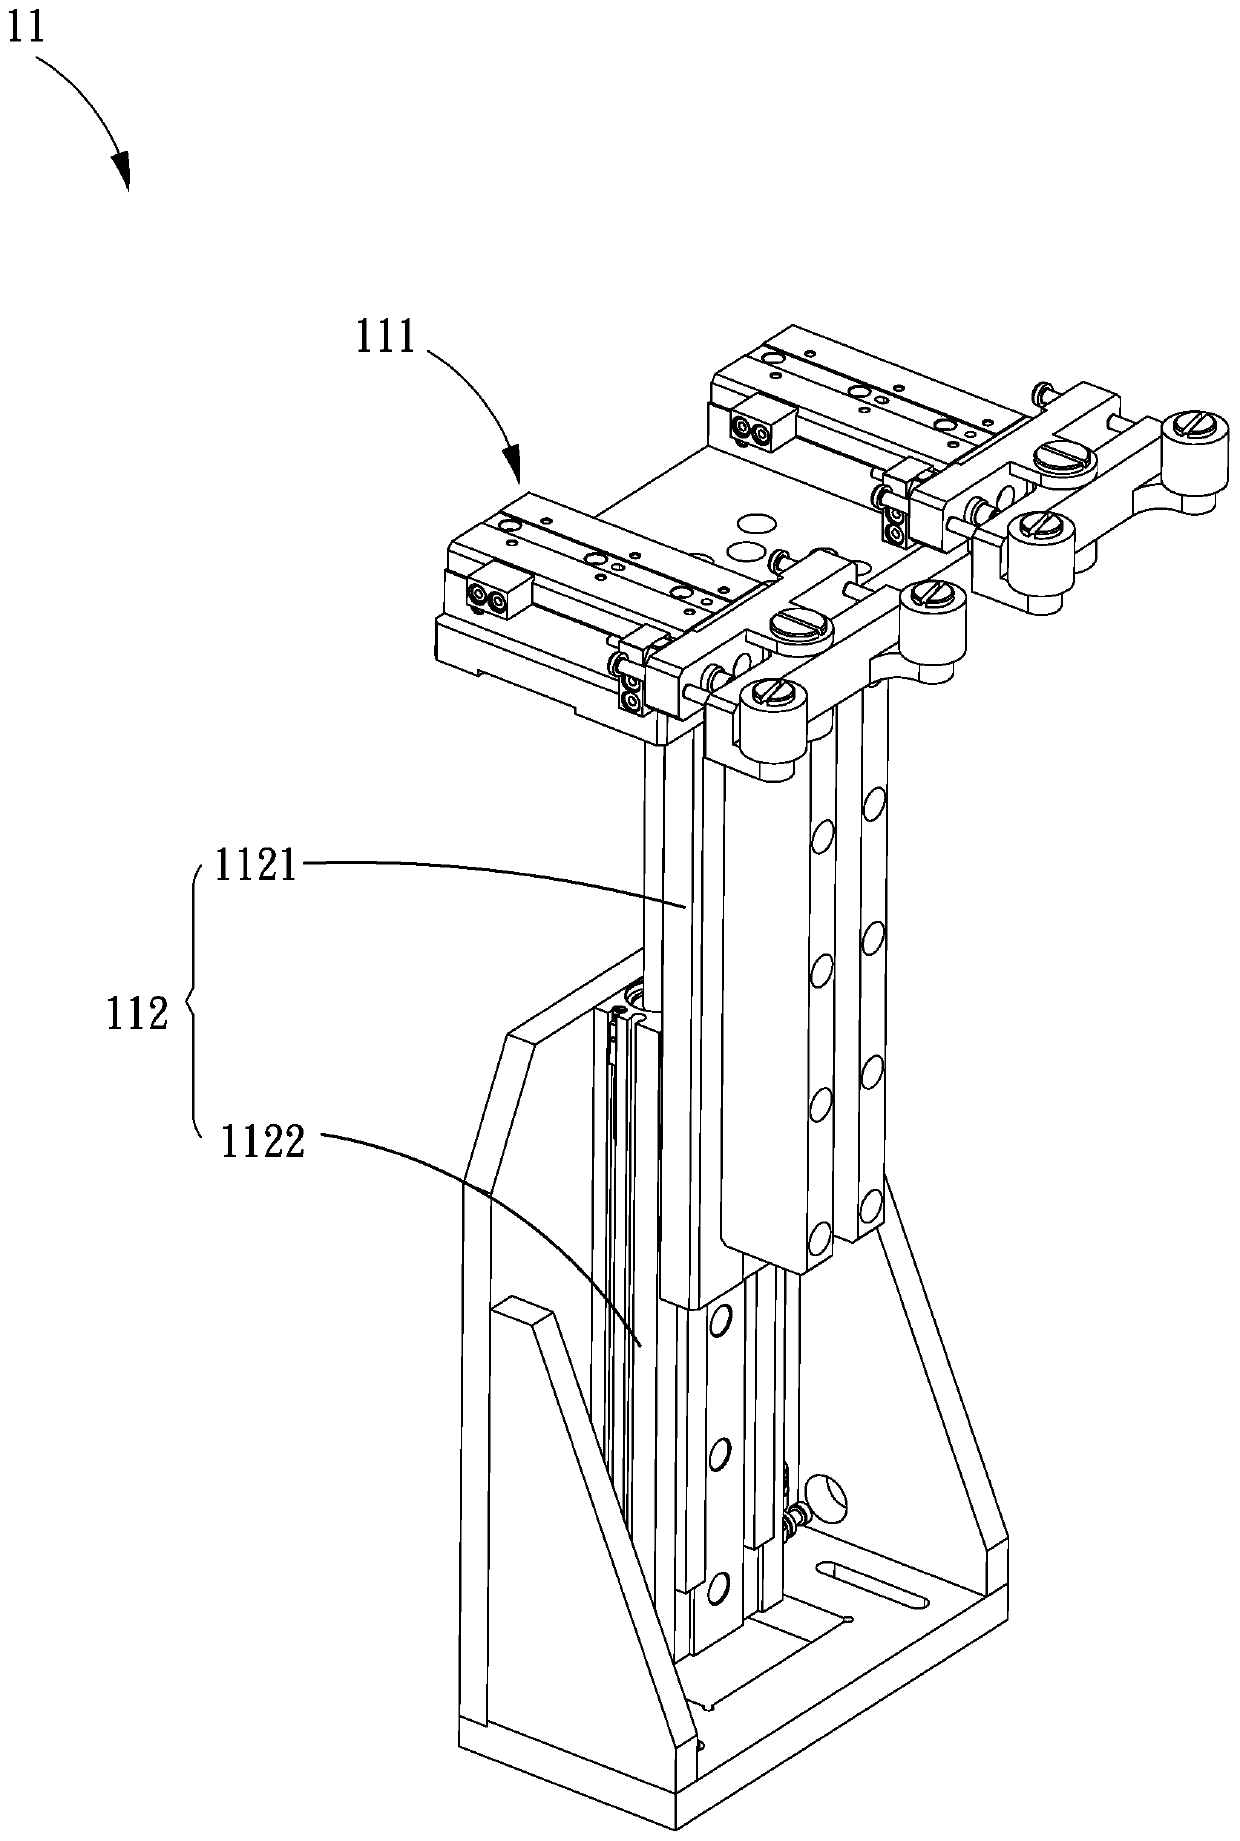 Sole clamping and positioning device